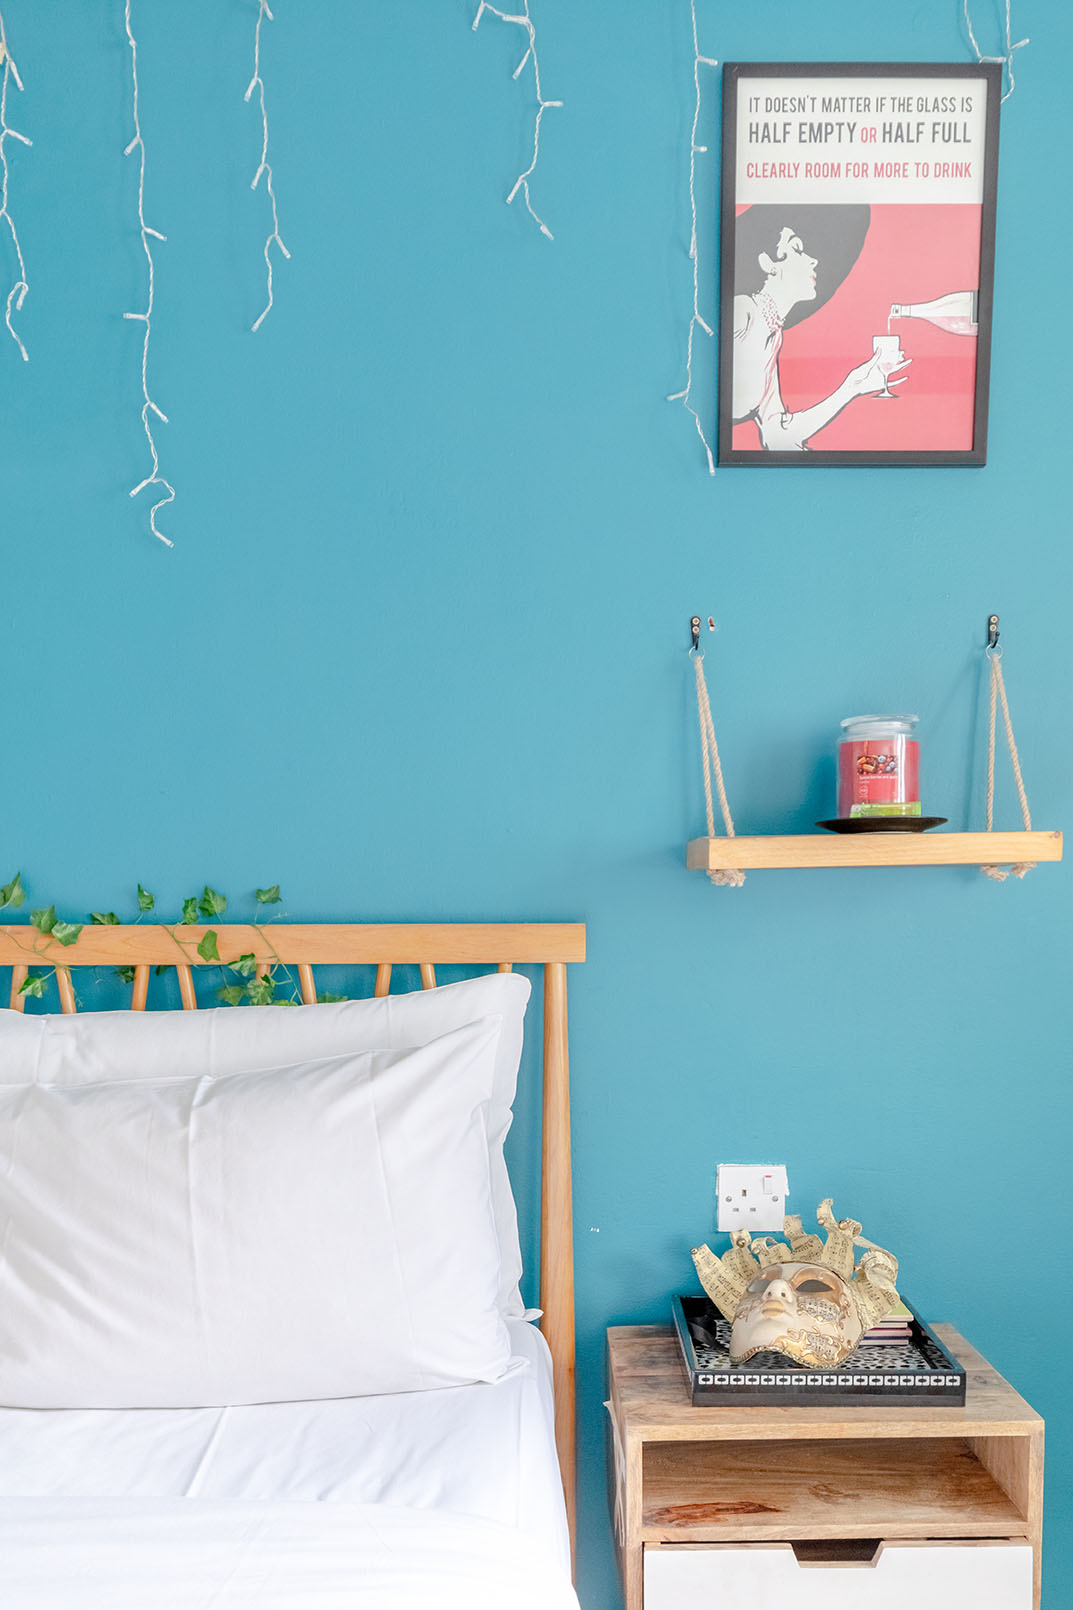 A turquoise coloured wall of a bedroom, the corner of the bed is captured, it's wooden, the bed has white linens, there's a hanging wooden shelf, a poster and a wooden natural bedside table, taken for property photography as a detail.